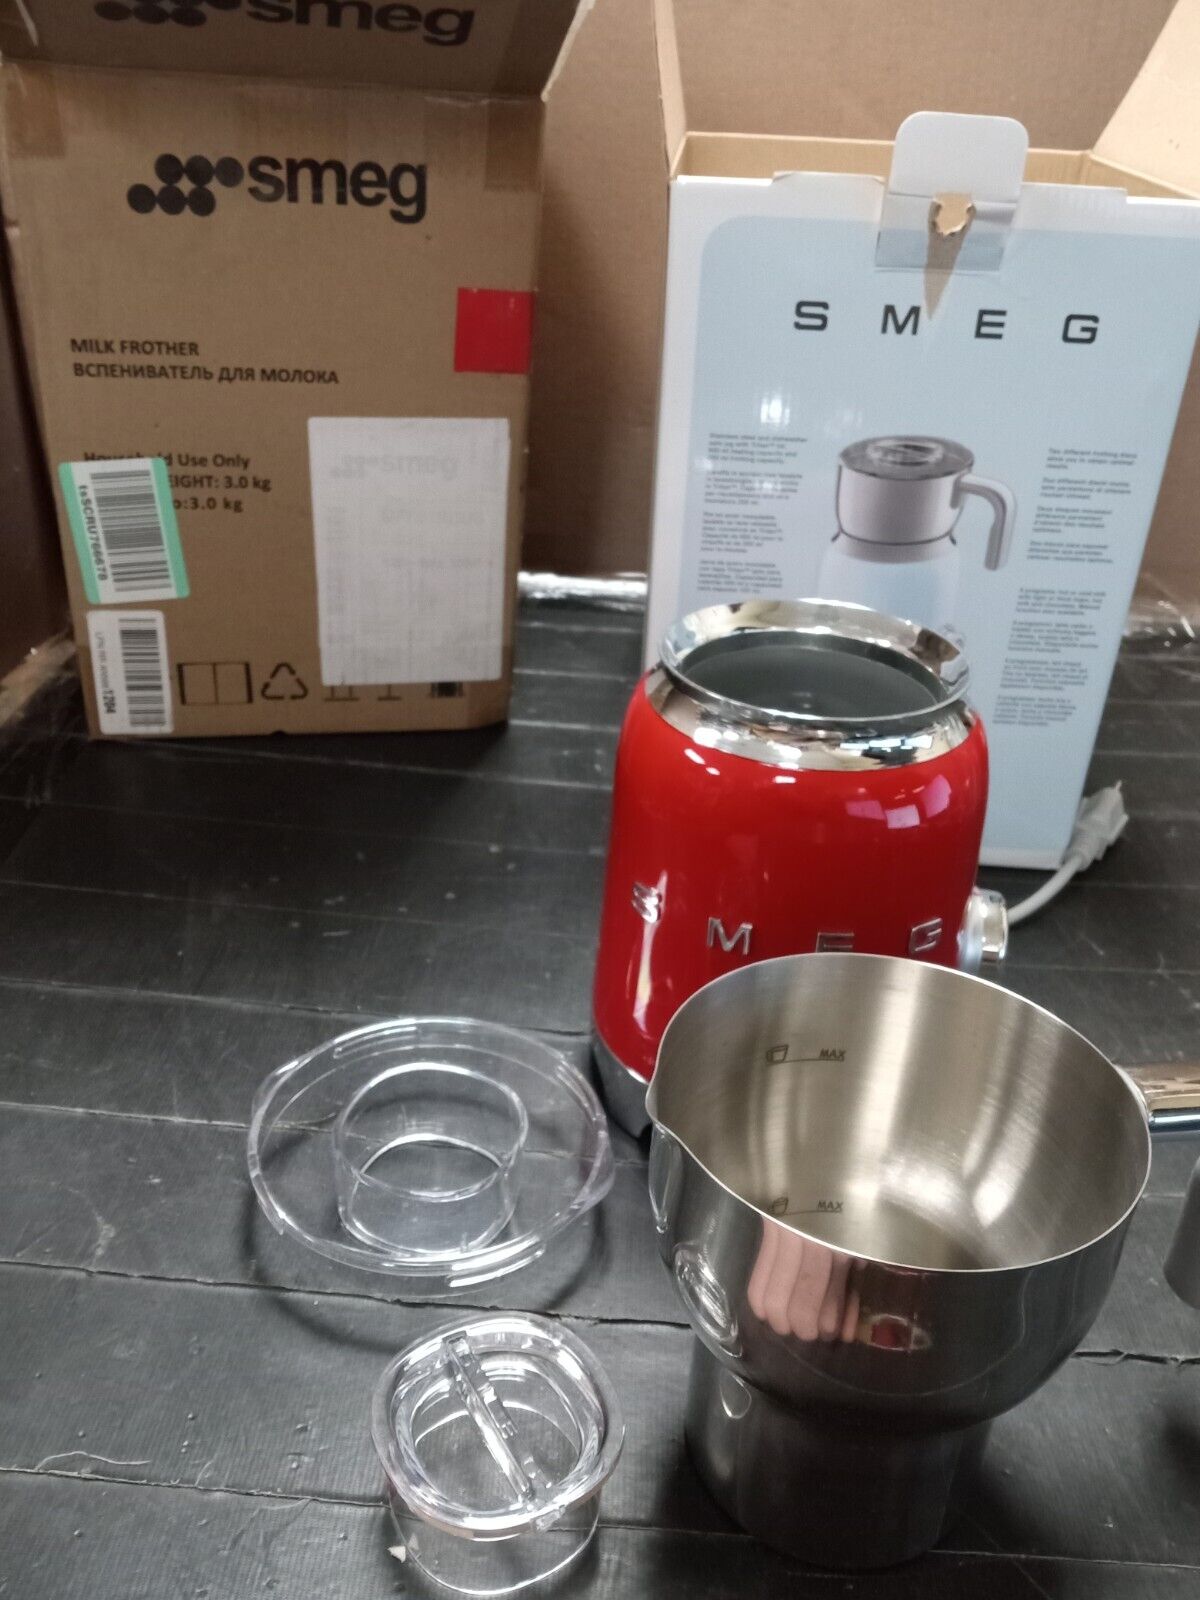 smeg-frother-image